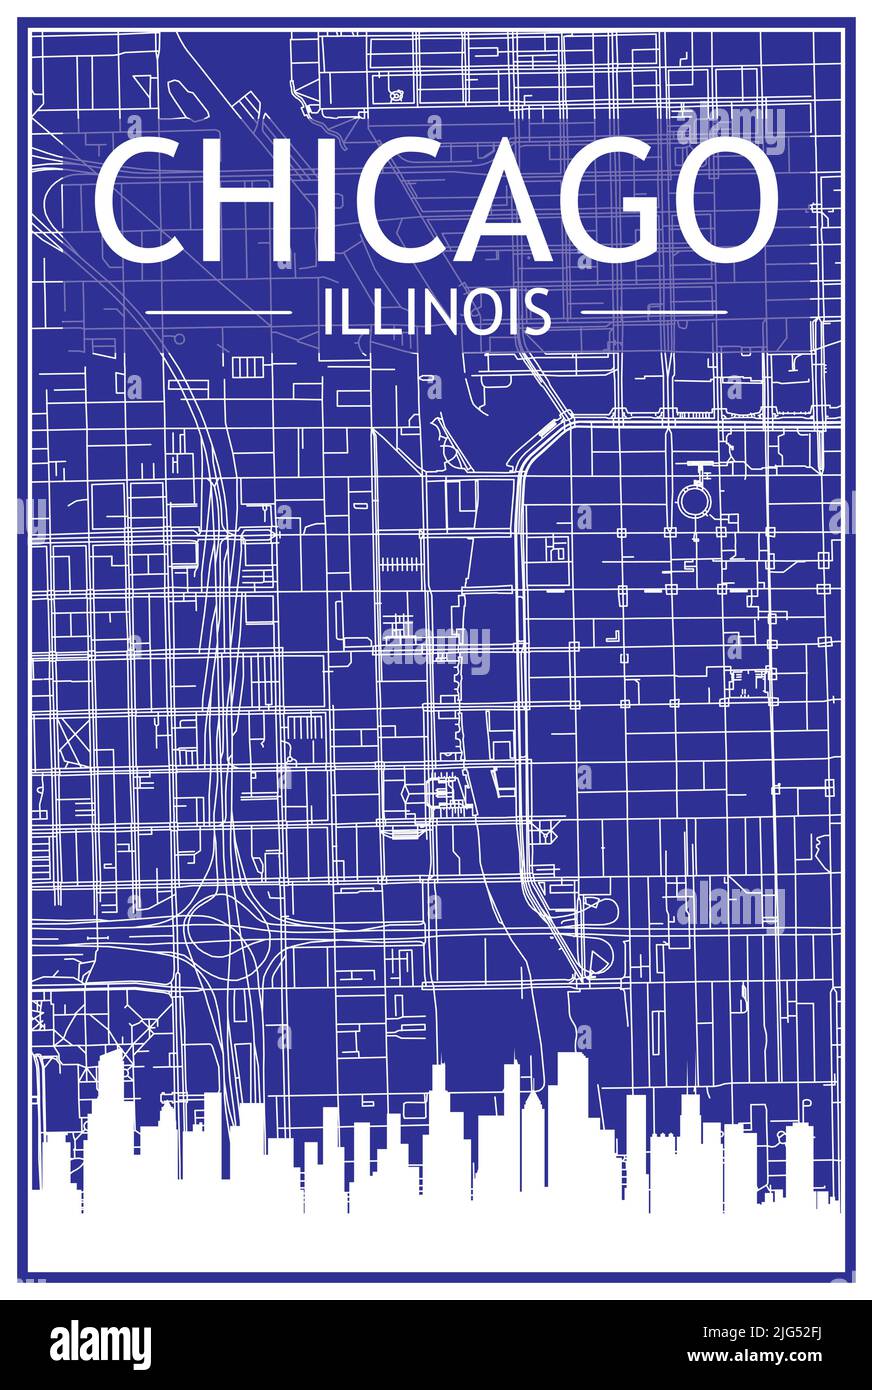 Technical drawing printout city poster with panoramic skyline and hand-drawn streets network on blue background of the downtown CHICAGO, ILLINOIS Stock Vector